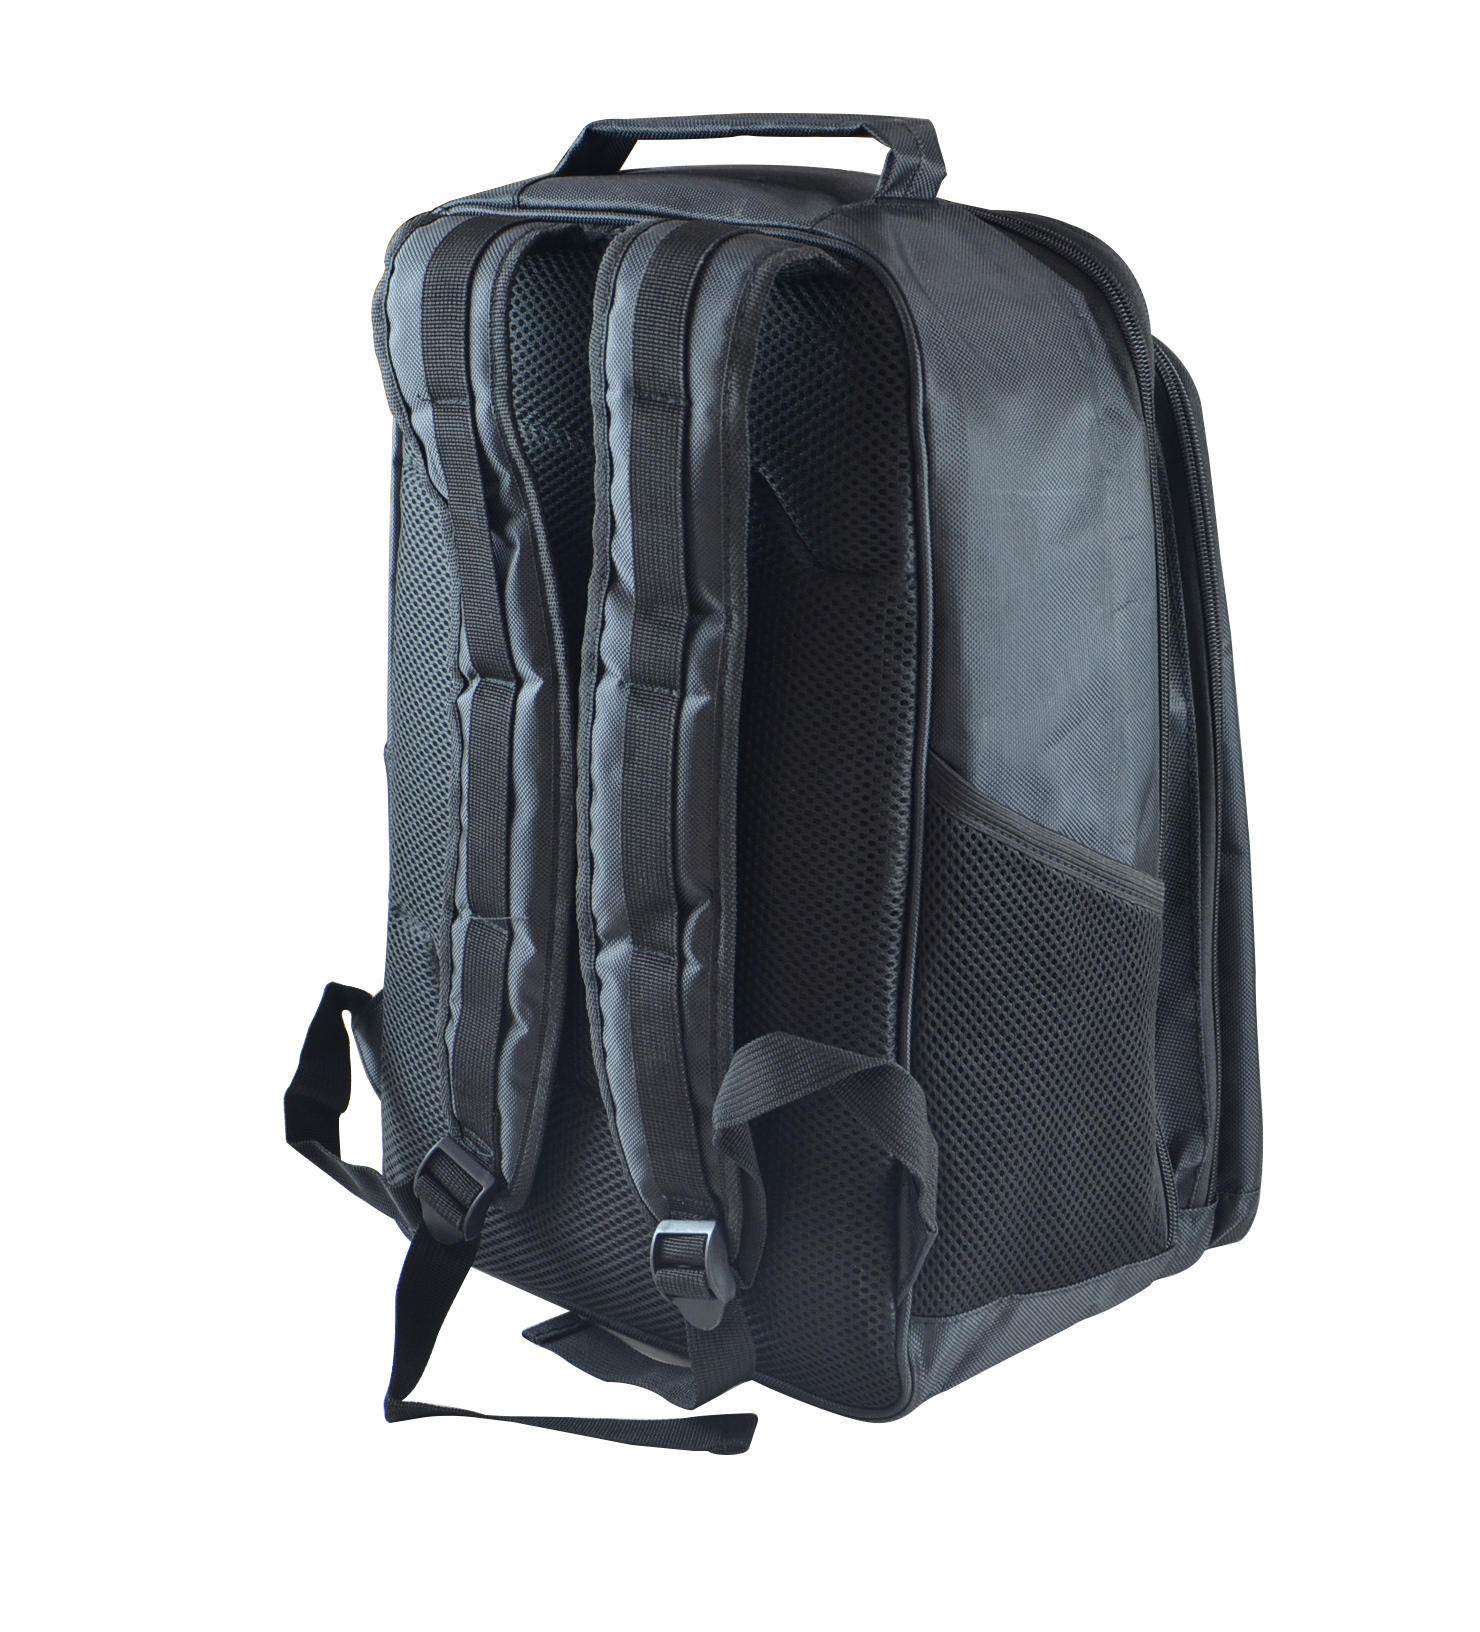 P018 Latest Large Capacity Oxford Cloth Backpack